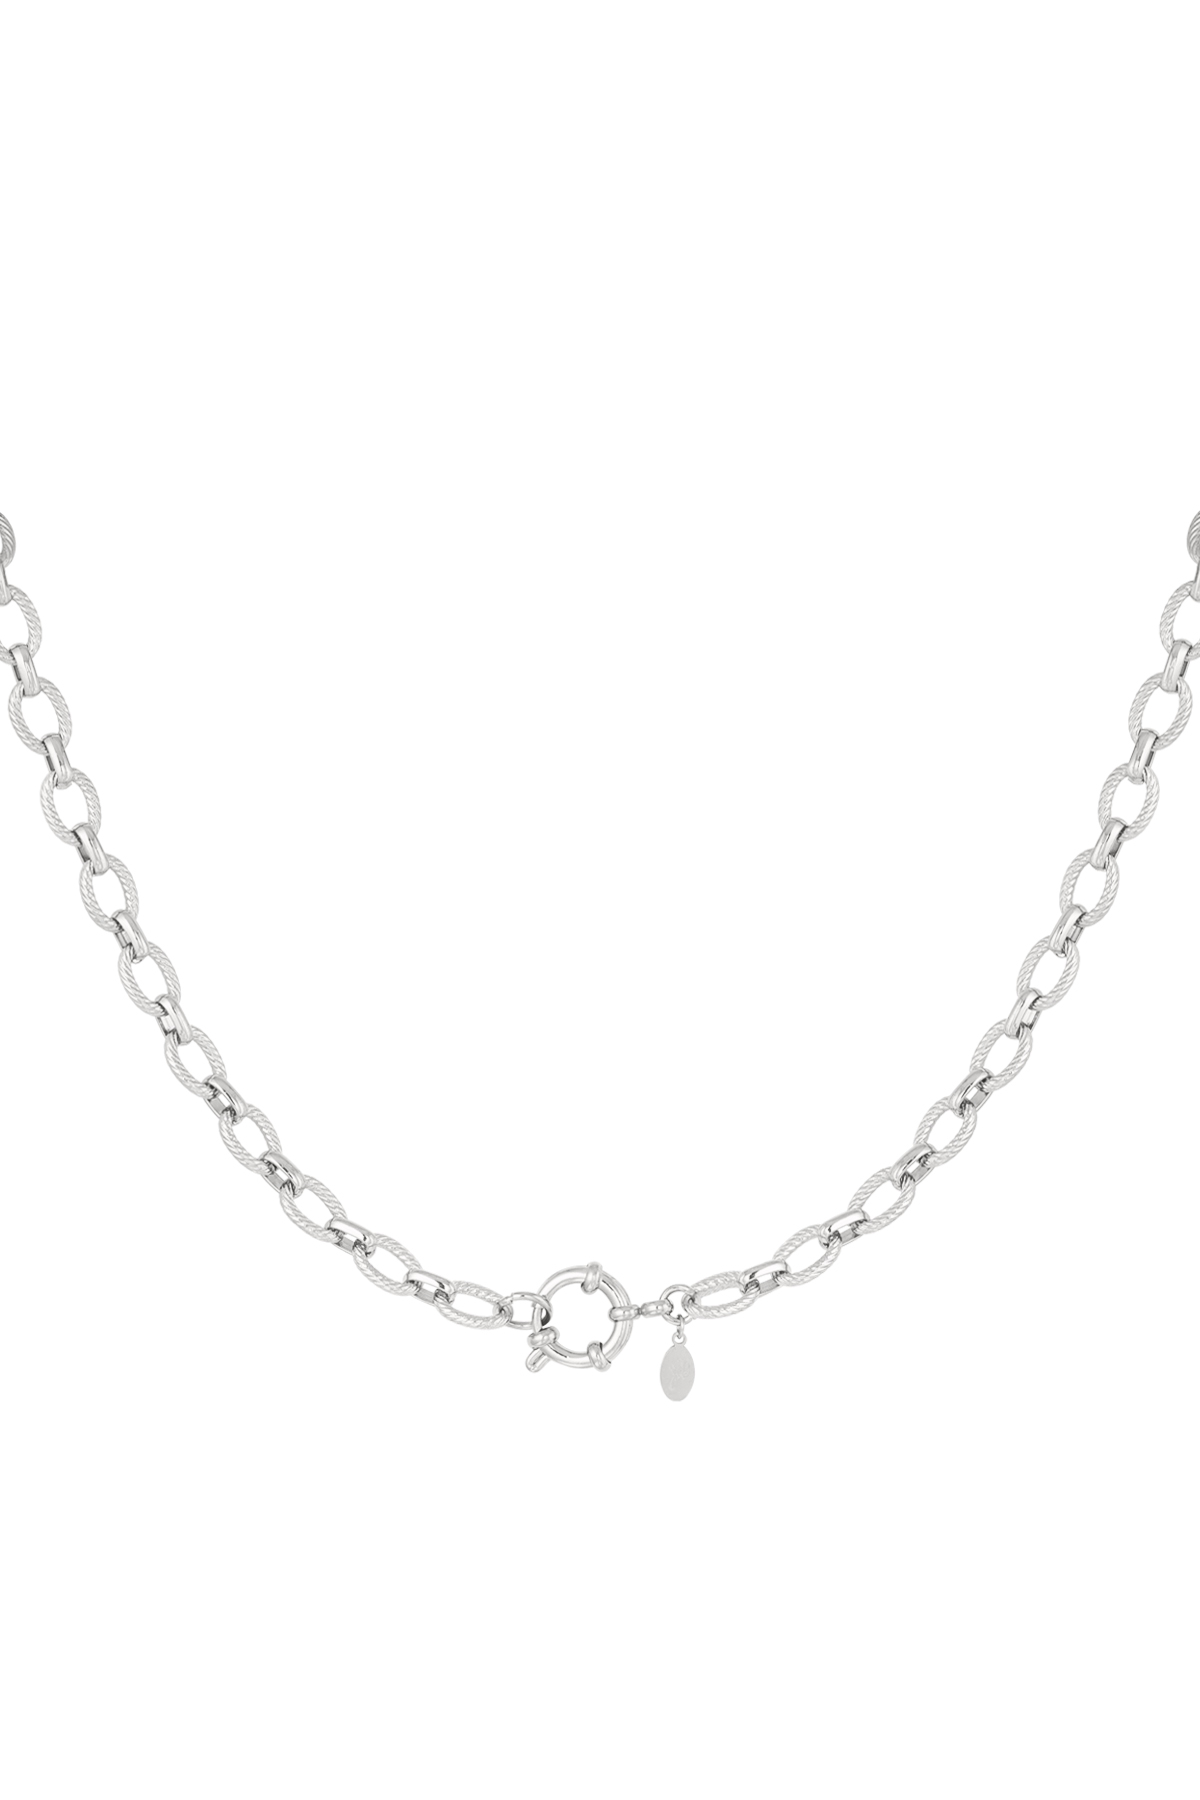 Necklace round links - silver h5 